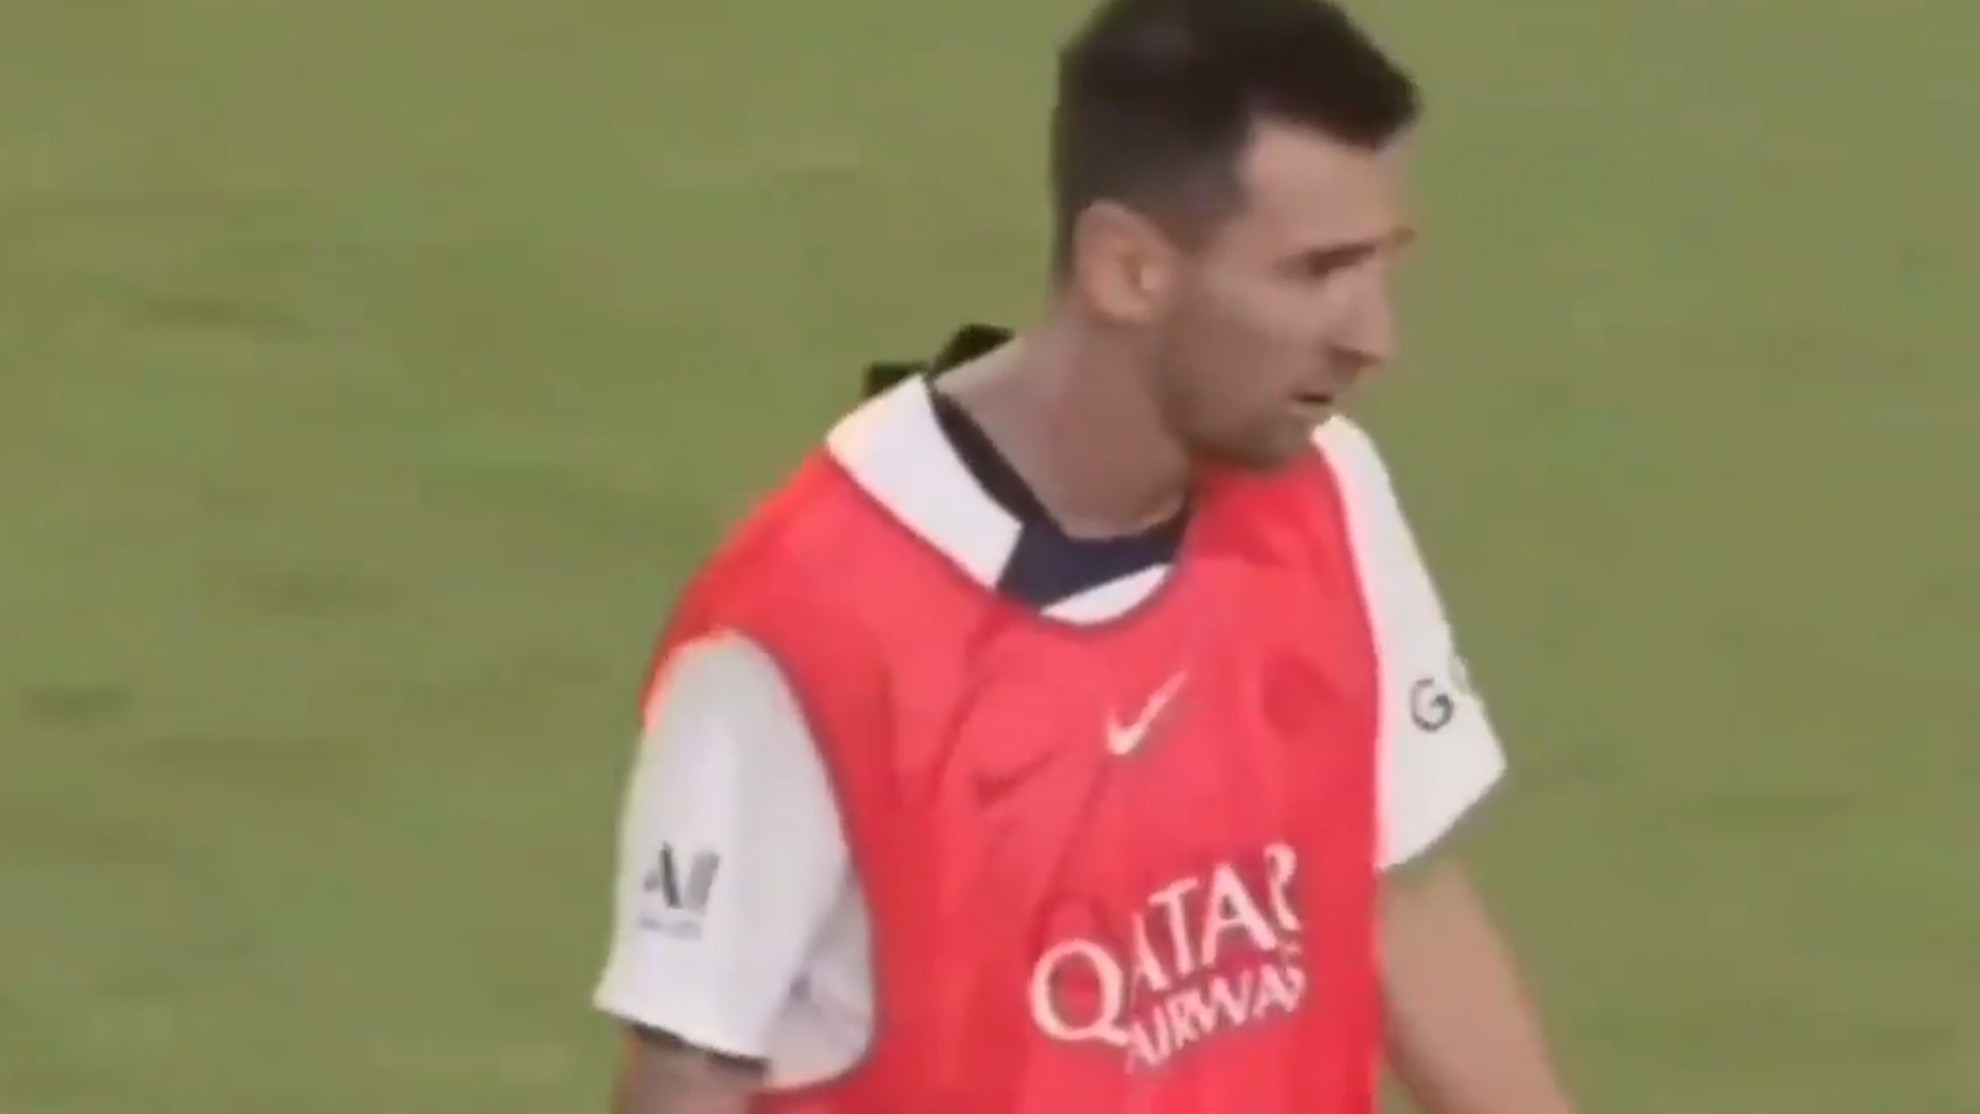 Tension at PSG training: Was Messi angry with Ramos over a tackle?